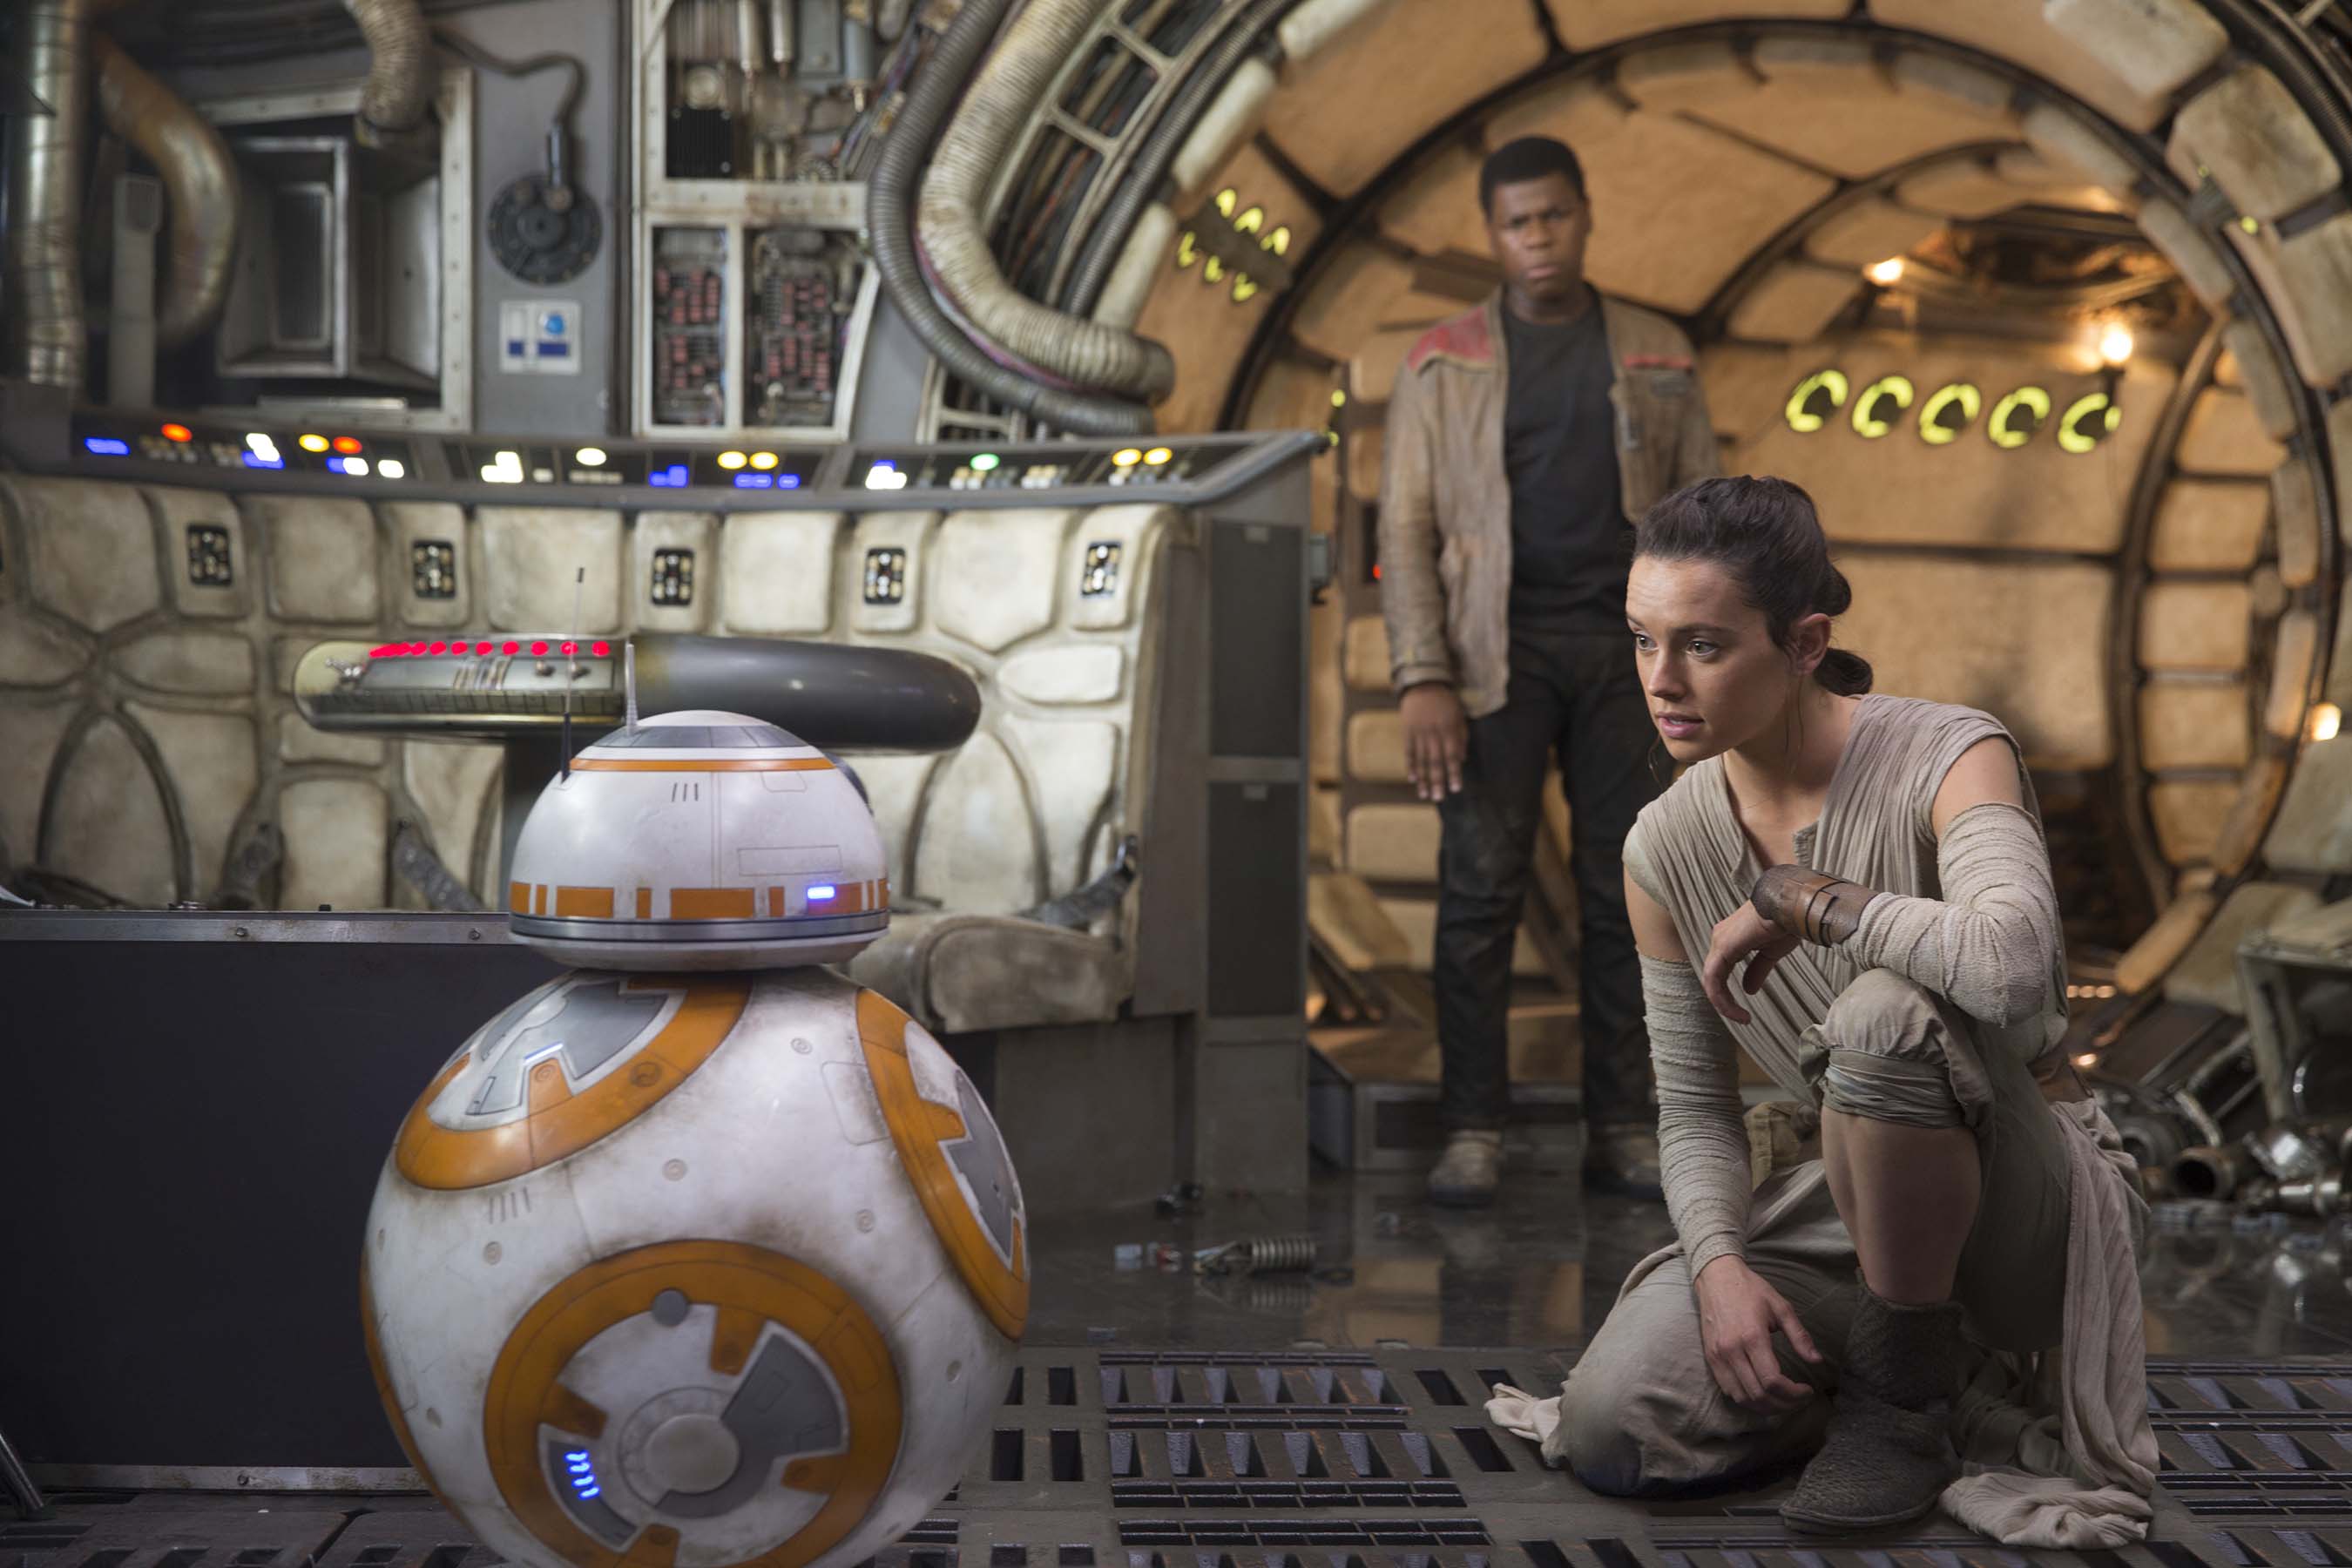 Star Wars: The Force Awakens is available on Digital HD April 1st and Blu-r...